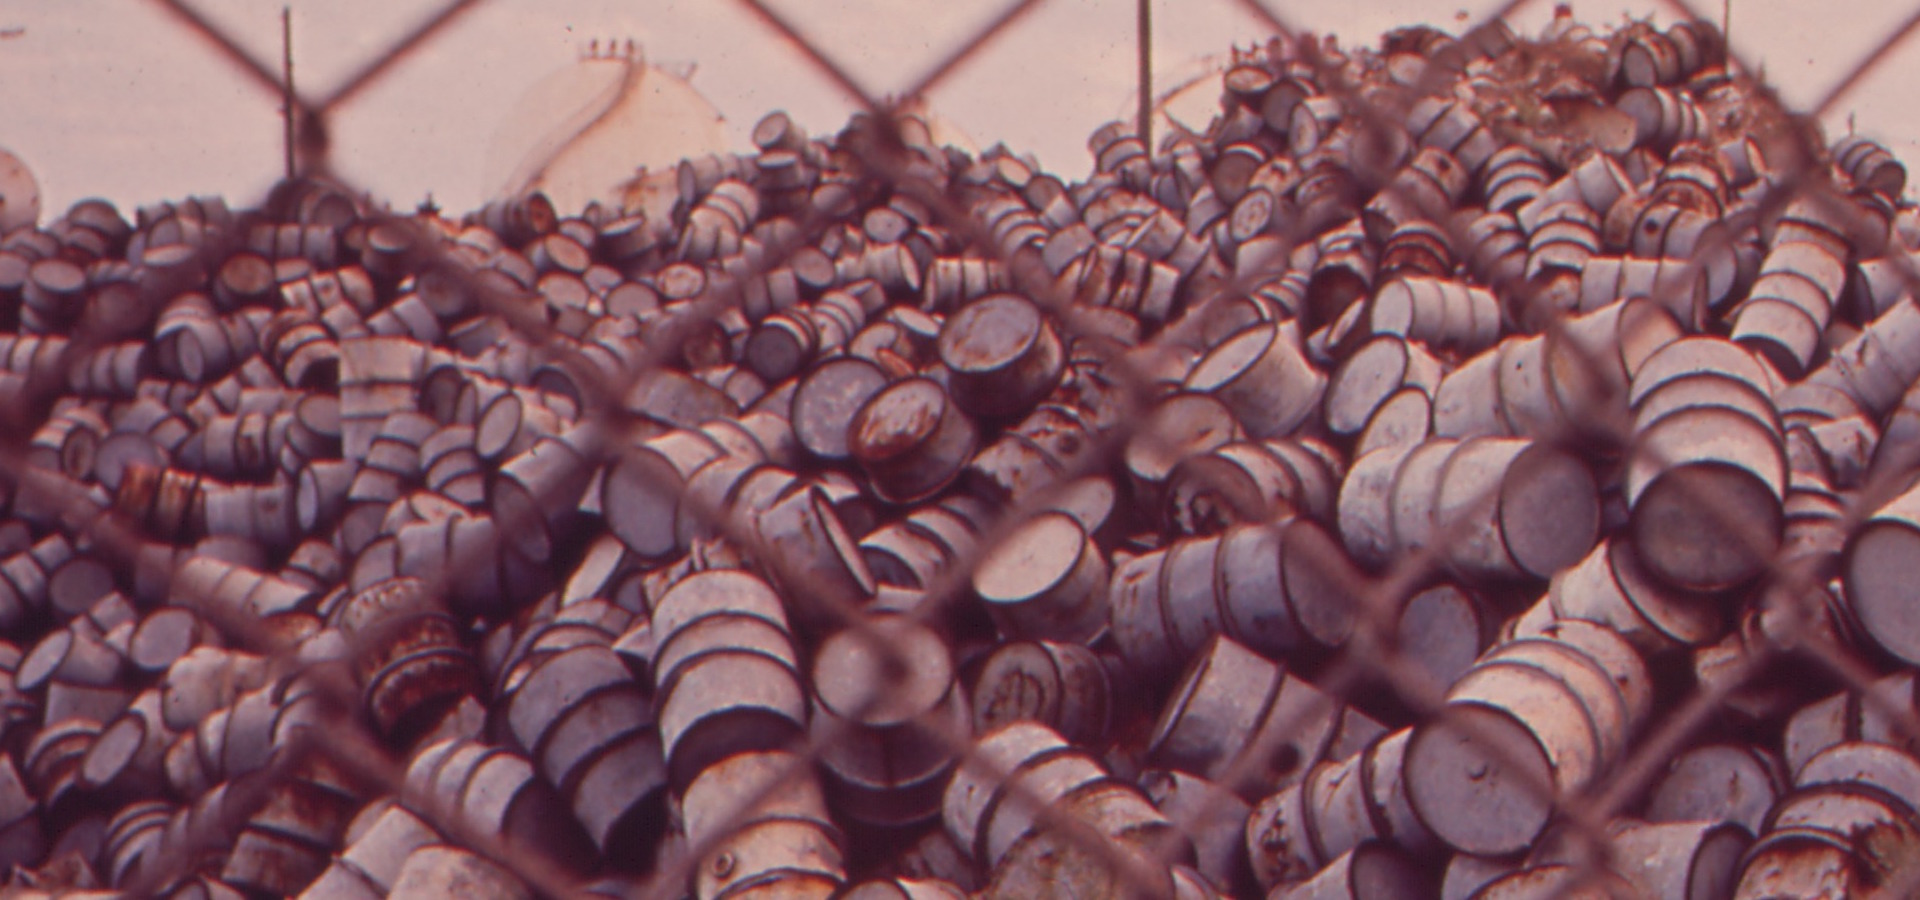 a mountain of damaged oil drums seen through a chain link fence